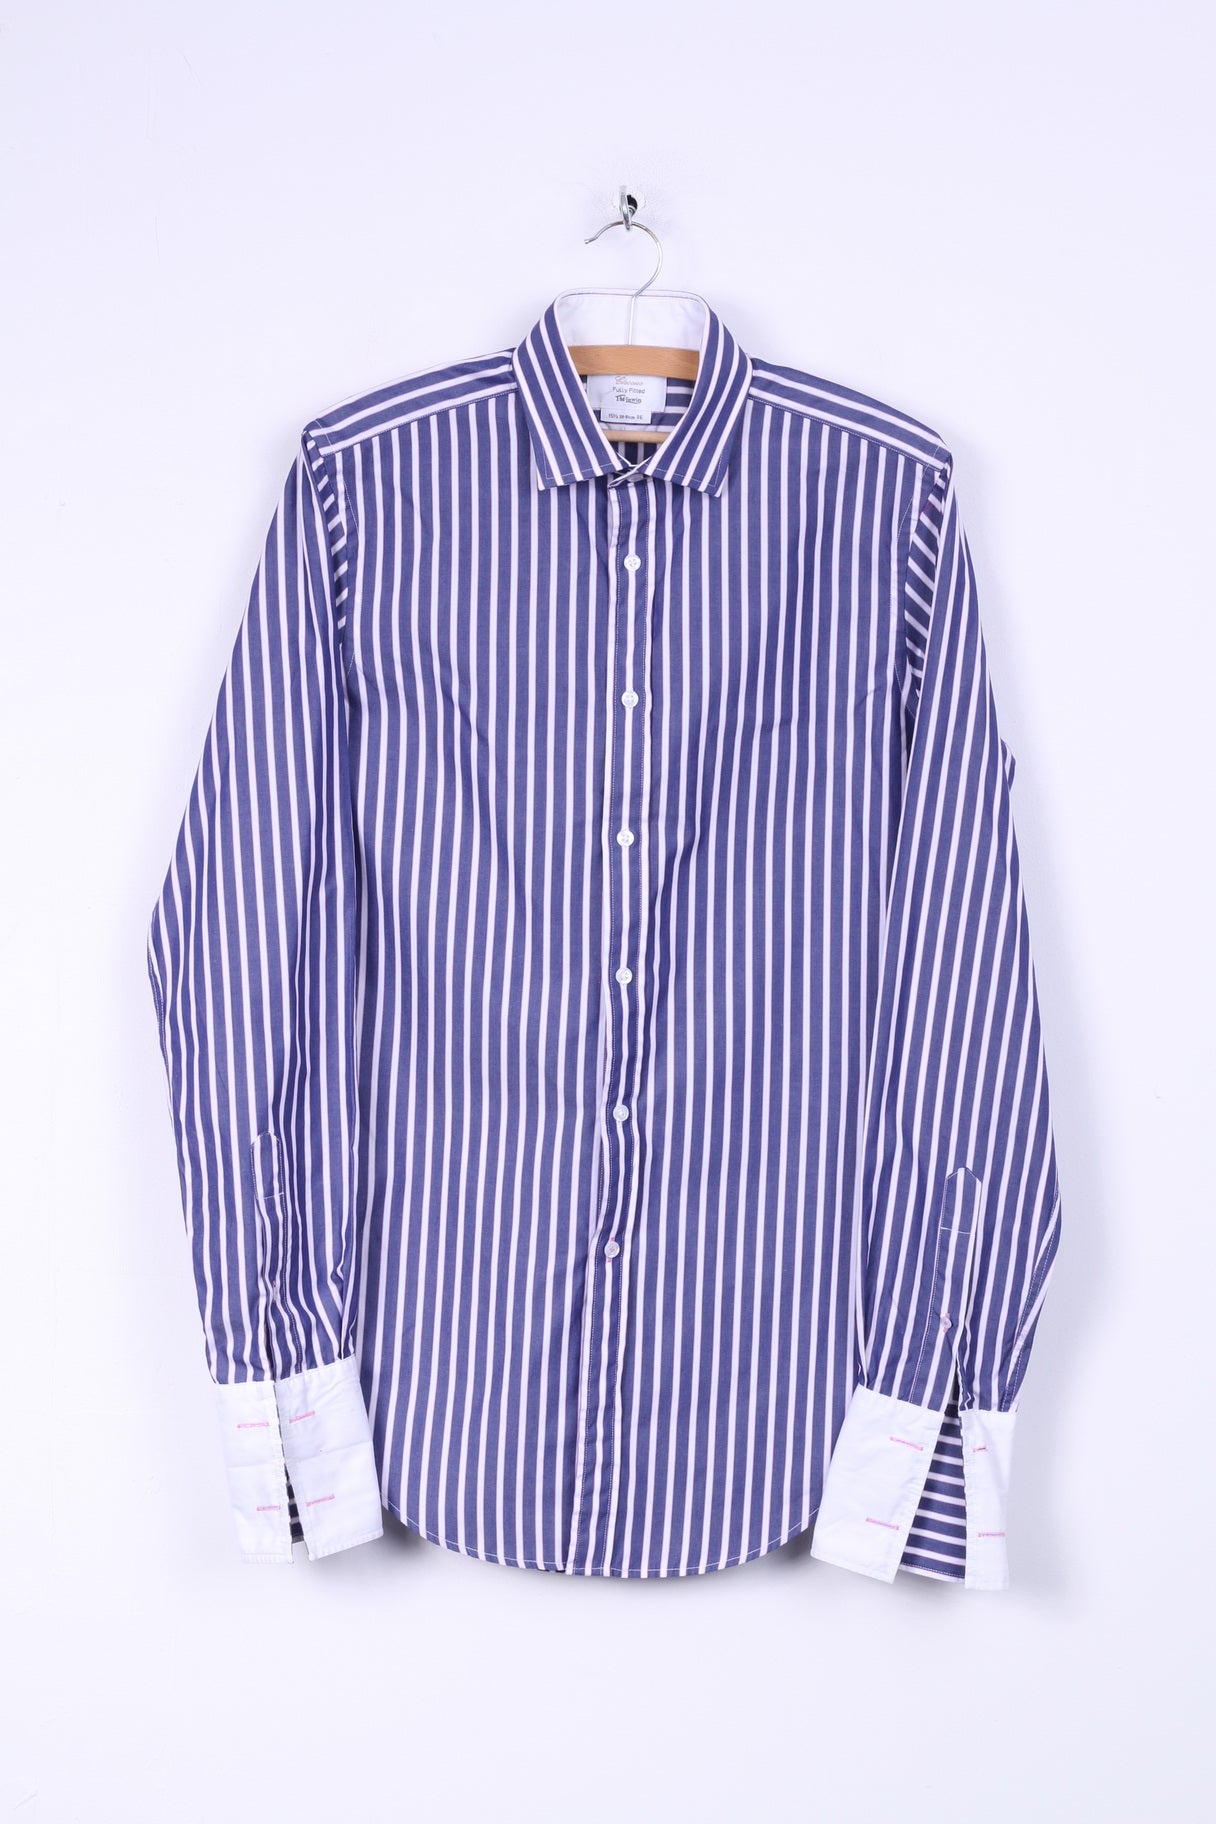 T.M. Lewin Mens 36 15.5 S Formal Shirt Blue Striped Cotton Fully